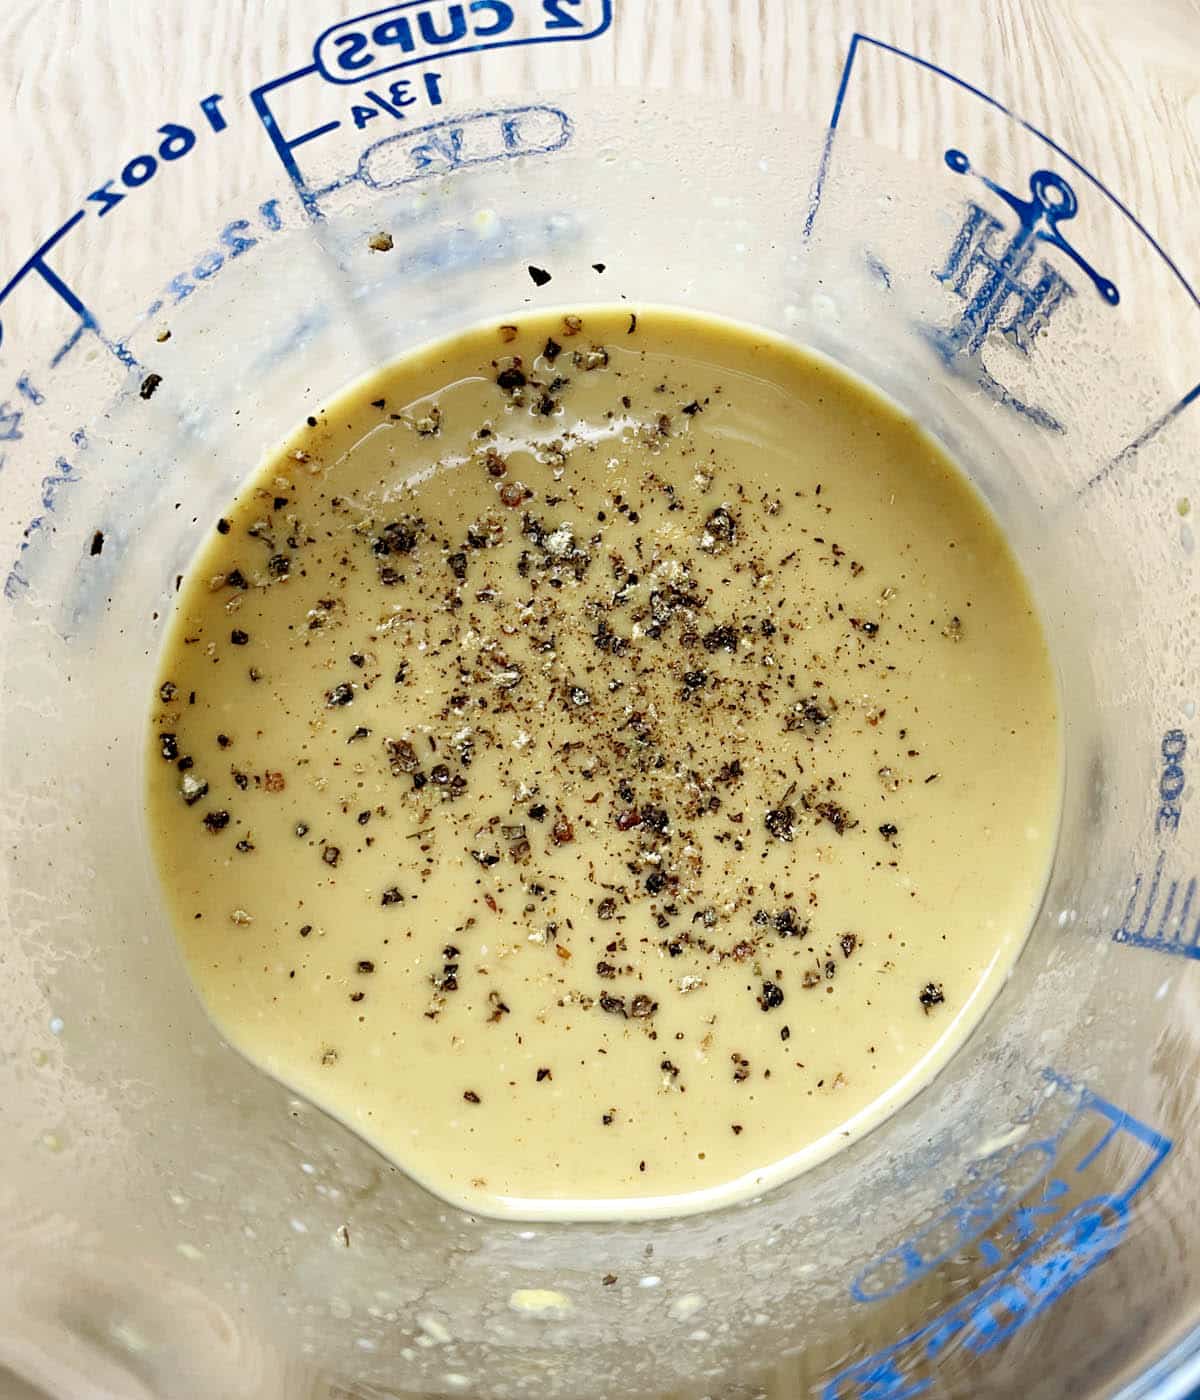 A glass measuring cup containing honey mustard dressing and black pepper.